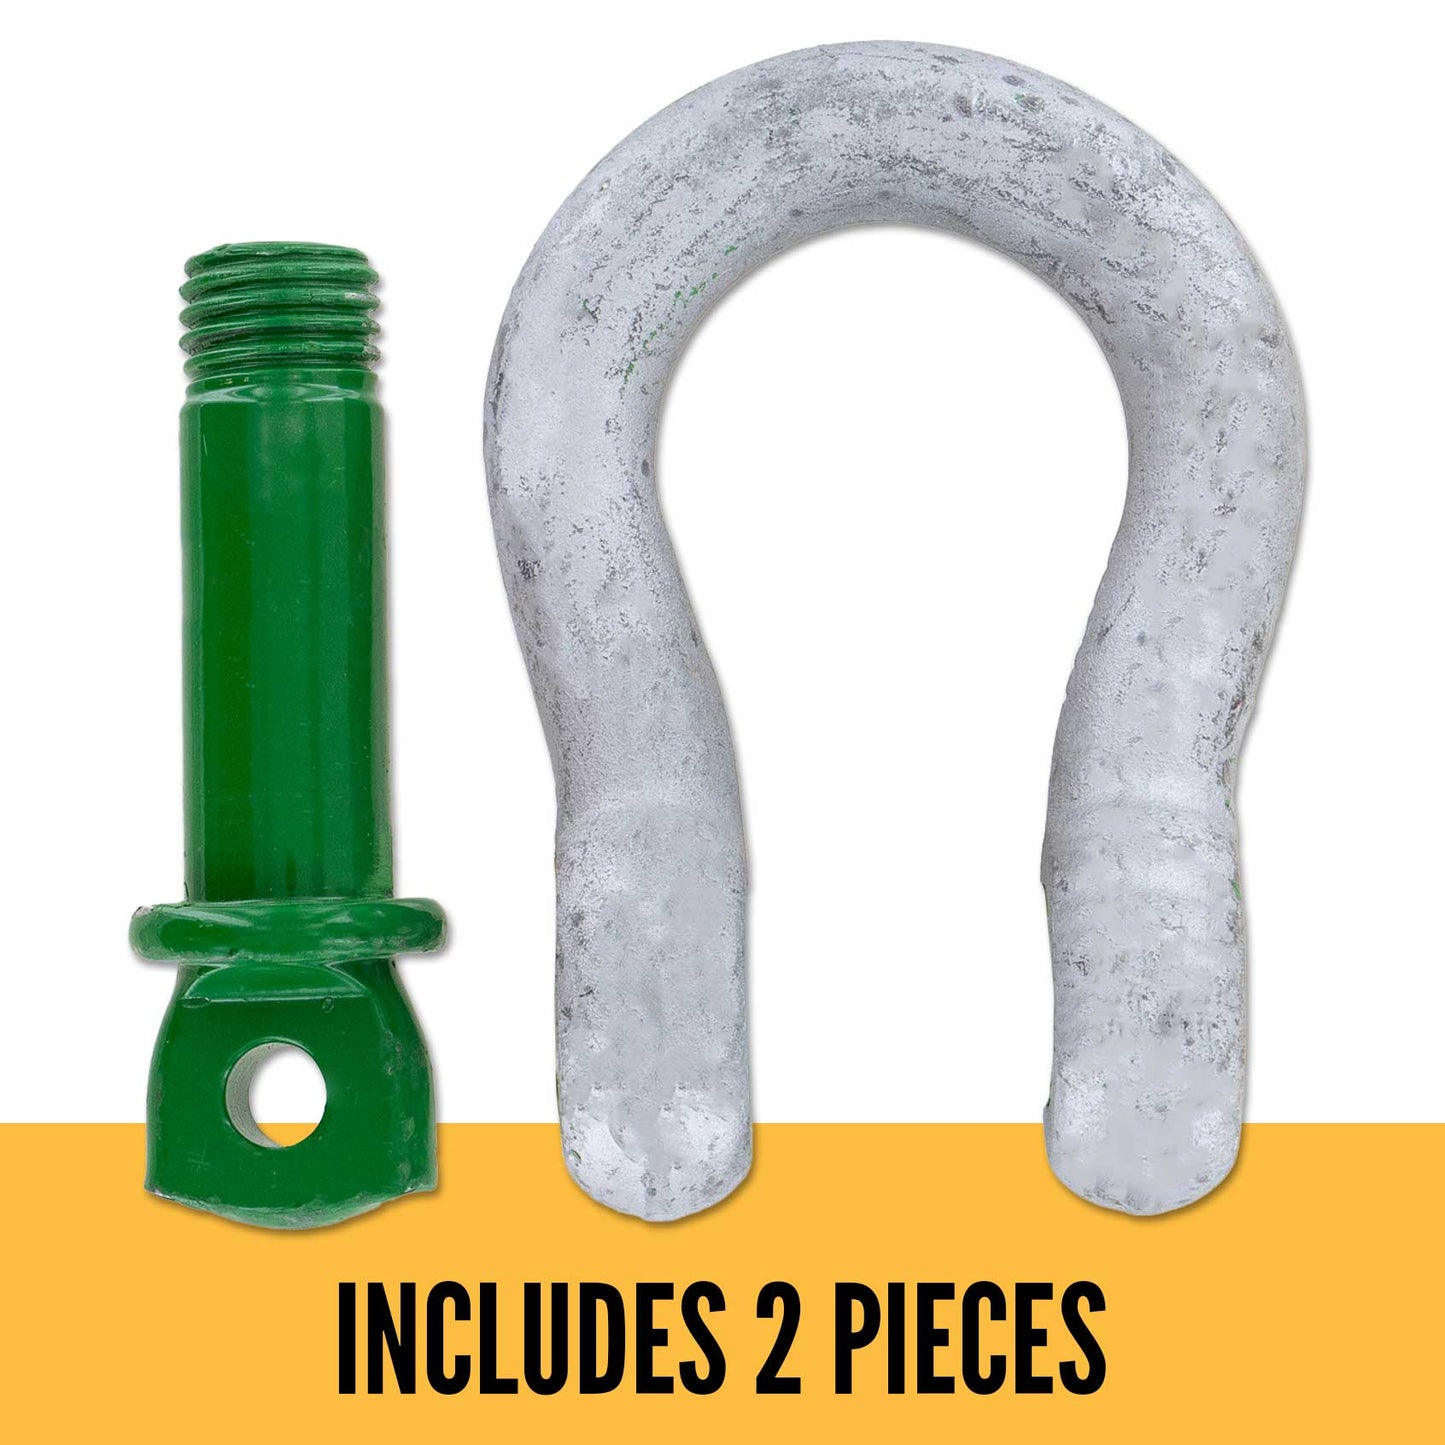 3/8" Van Beest Green Pin® Screw Pin Anchor Shackle | G-4161 - 1 Ton parts of a shackle